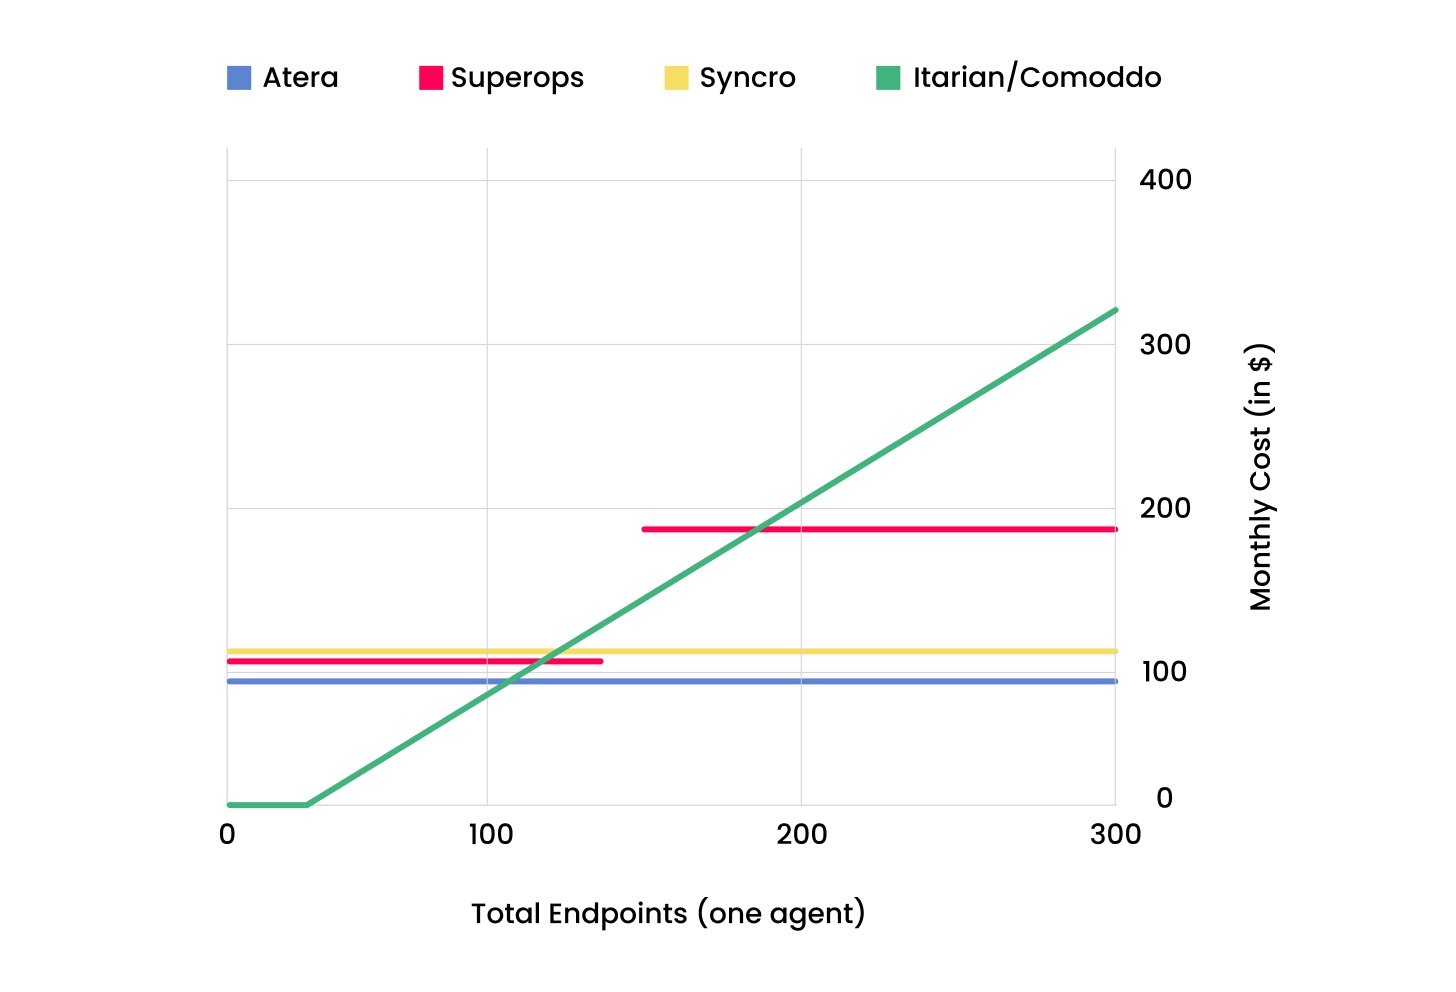 Chart of pricing comparison of all RMMs when all endpoints are managed by a single agent